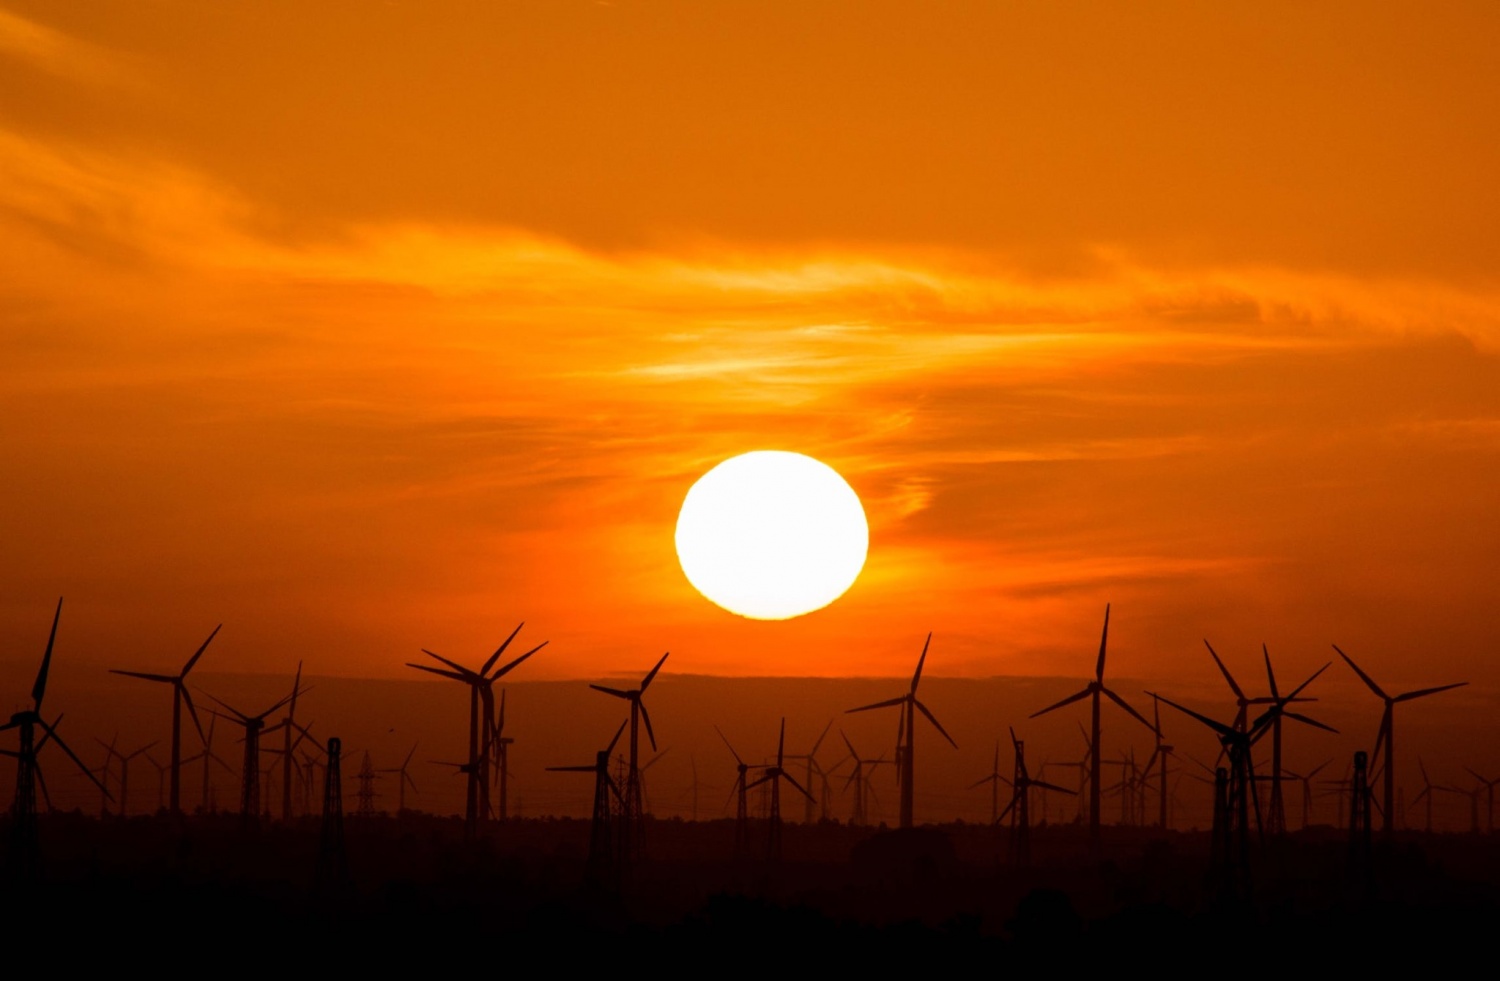 38% of Europe's Electricity Is from Renewable Sources: What can the US Learn from them?